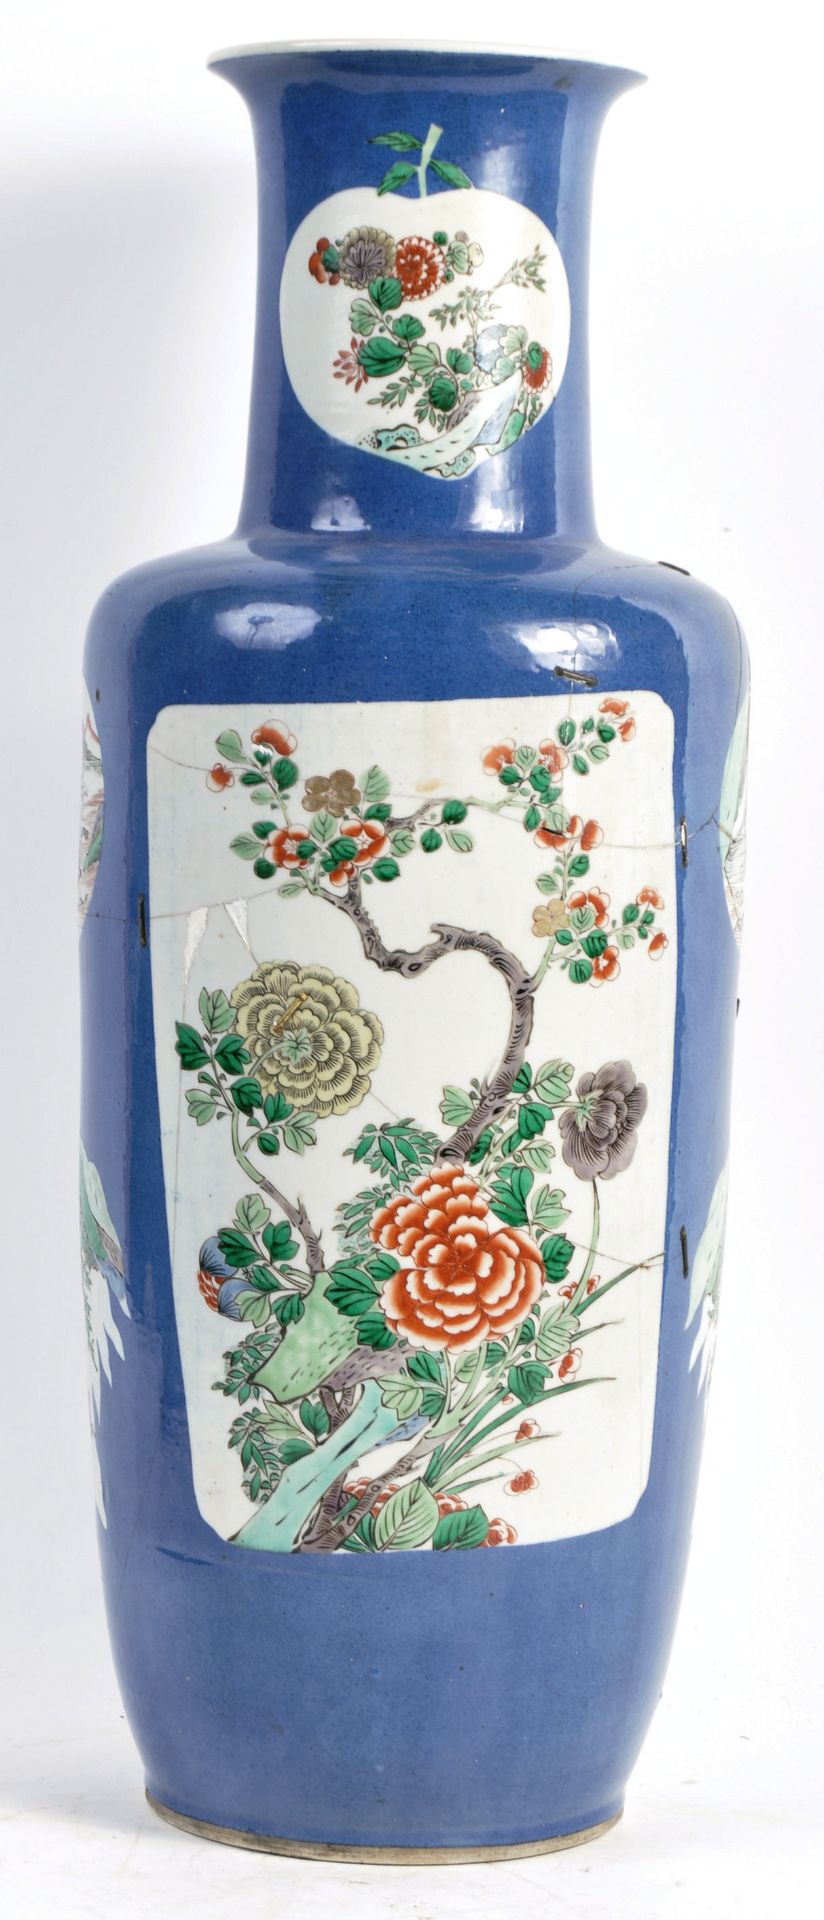 A LARGE 18TH CENTURY CHINESE POWDER BLUE GLAZE VASE OF ROULEAU FORM